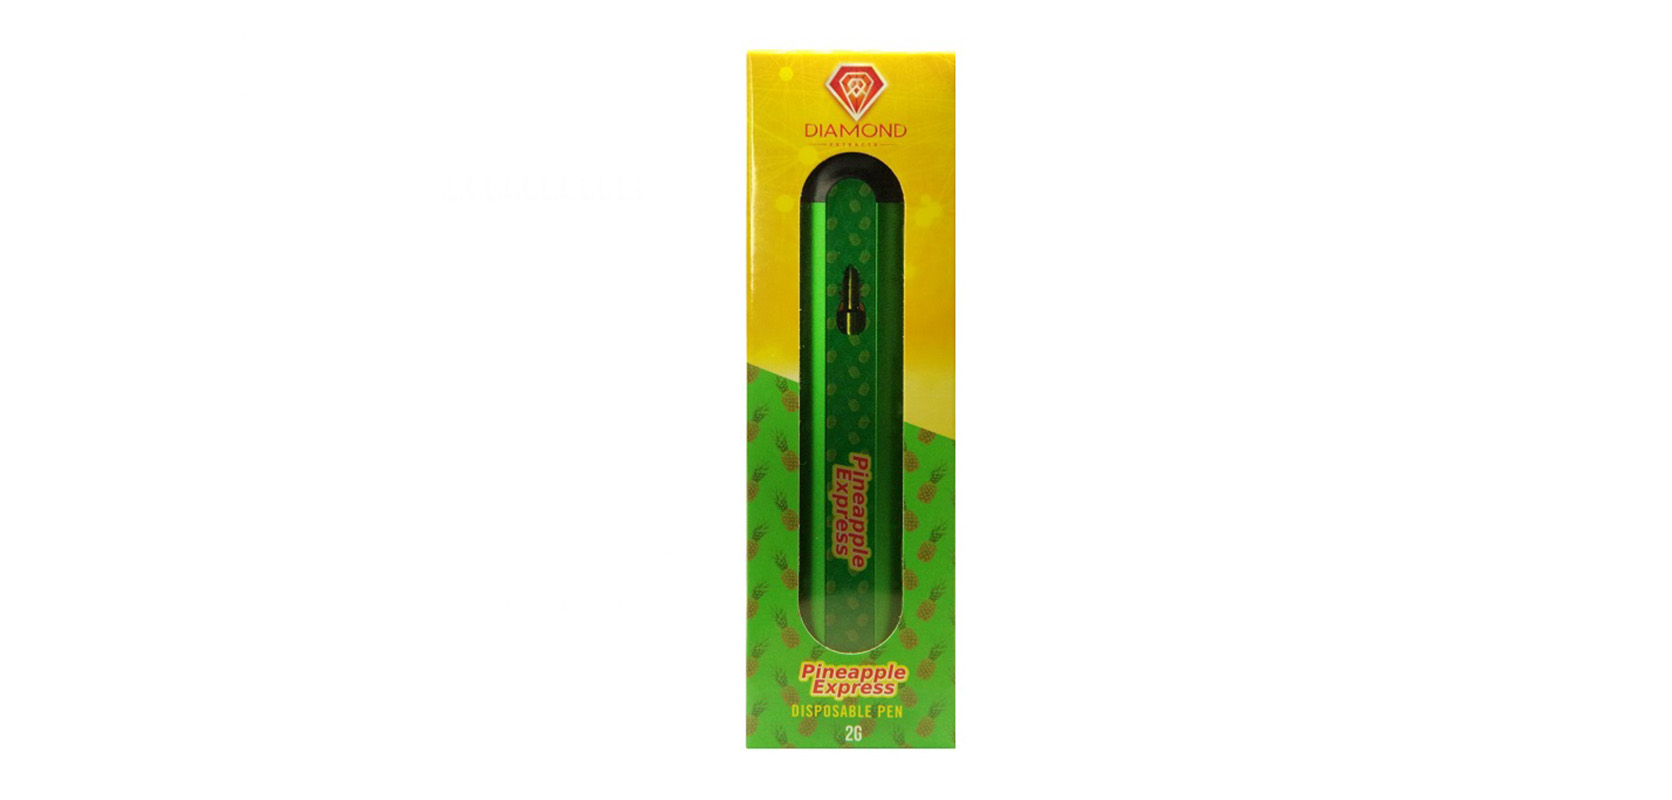 Pineapple Express 2G Disposable Vape Pen for sale at Low Price Bud weed dispensary. Buy weed online in Canada.